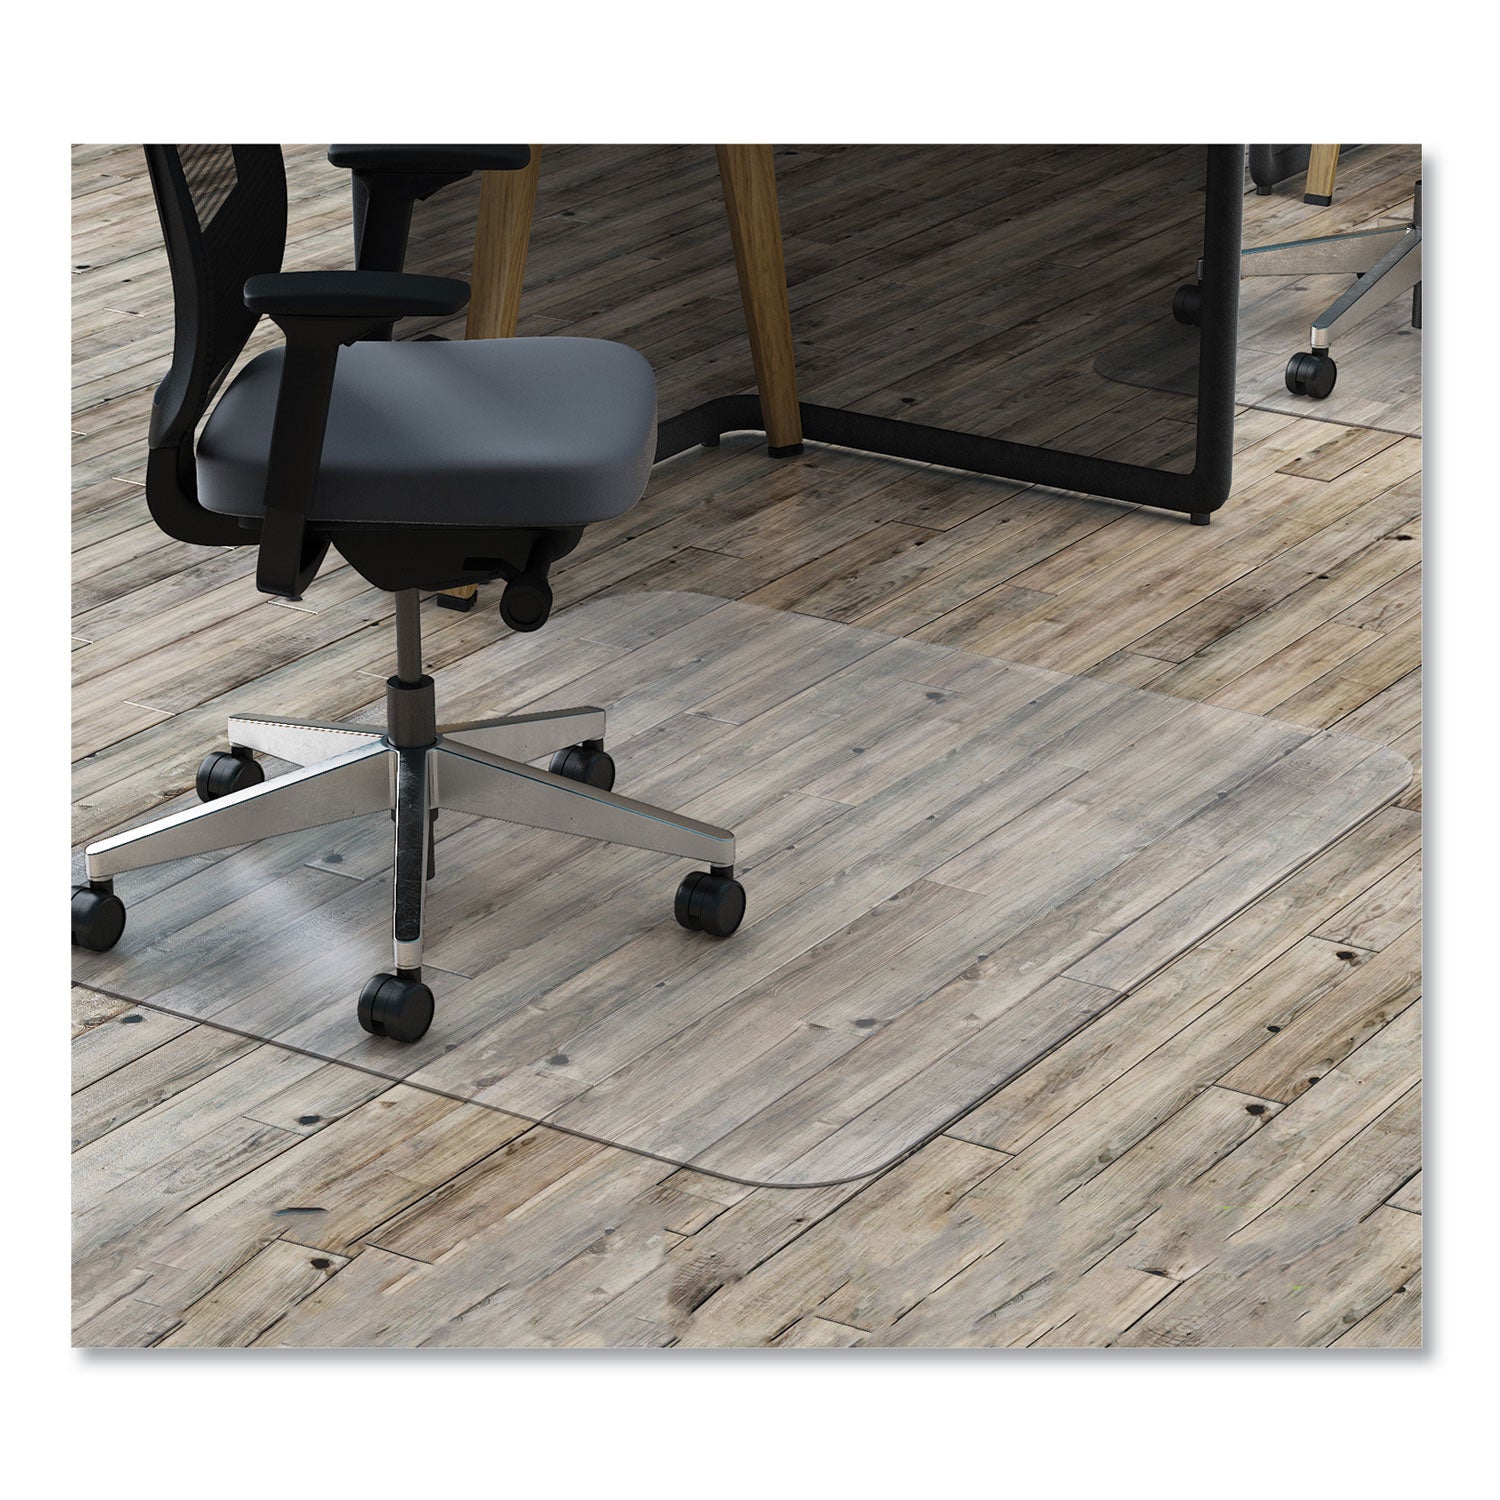 economat-all-day-use-chair-mat-for-hard-floors-rolled-packed-45-x-53-clear_defcm21242com - 3